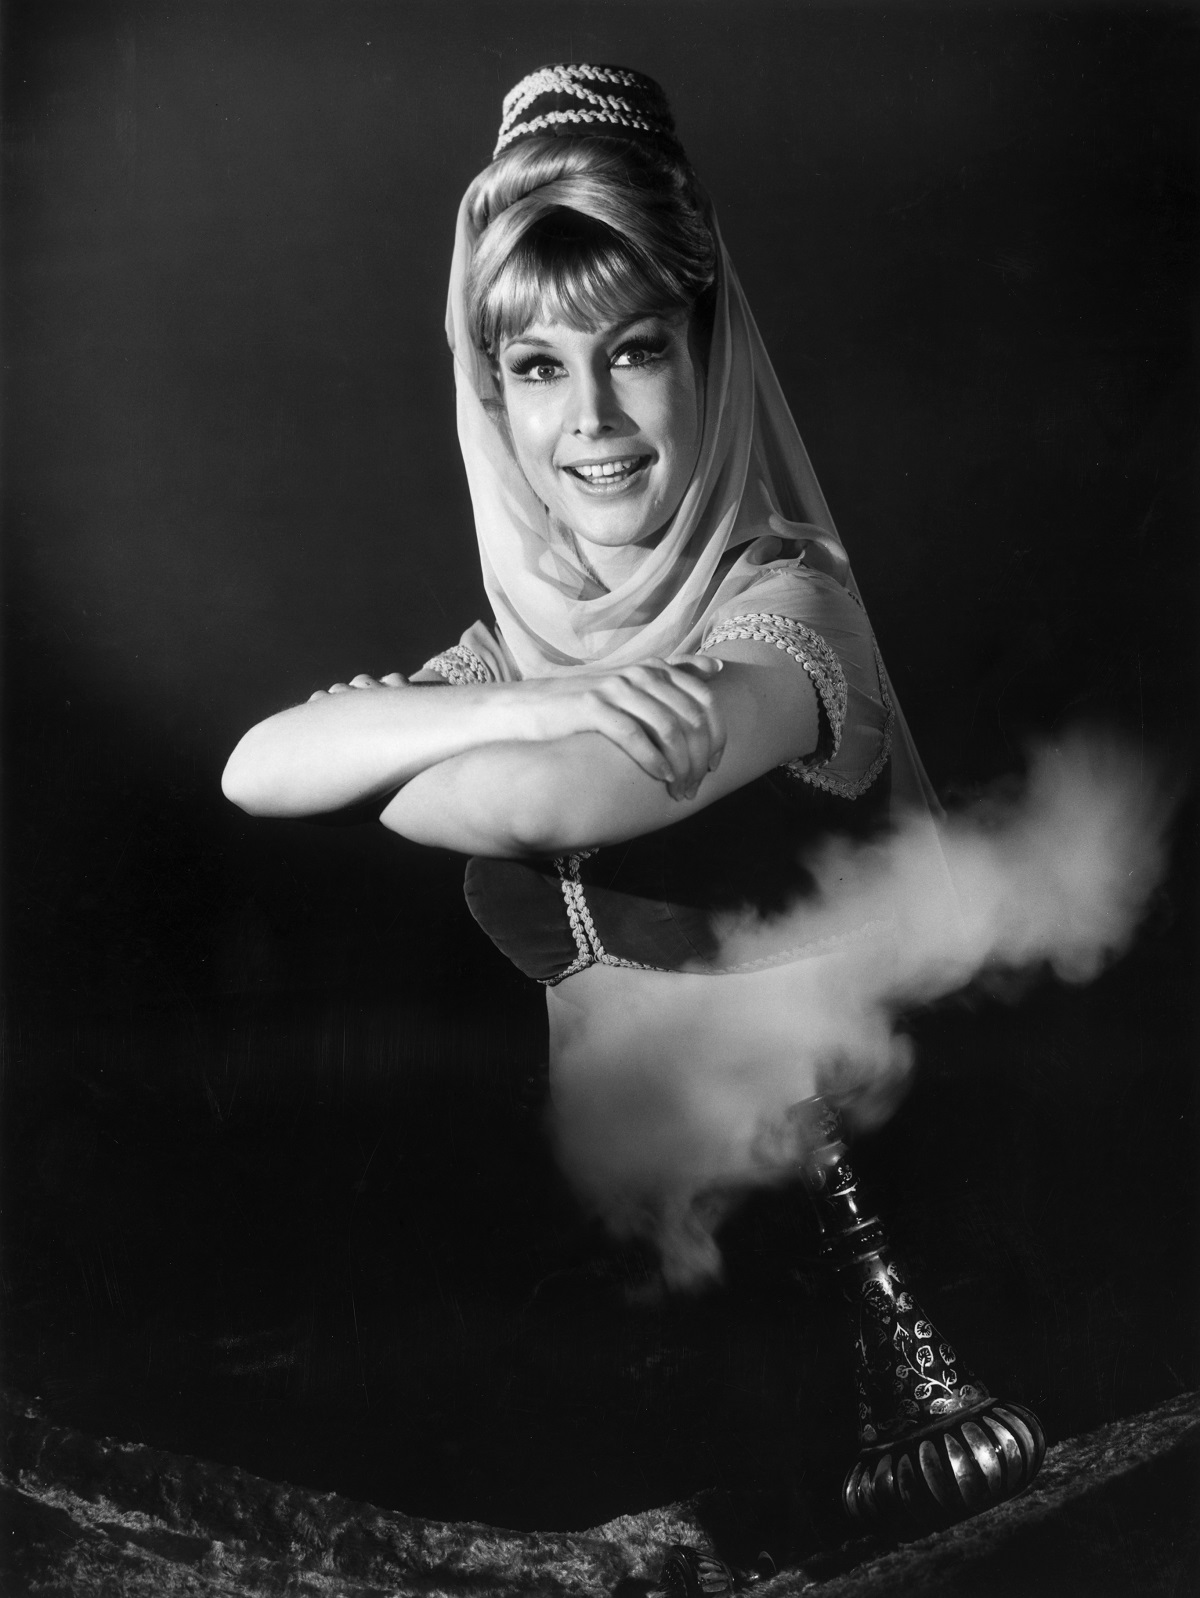 Barbara Eden rises from smoke exiting a genie bottle in a promotional portrait